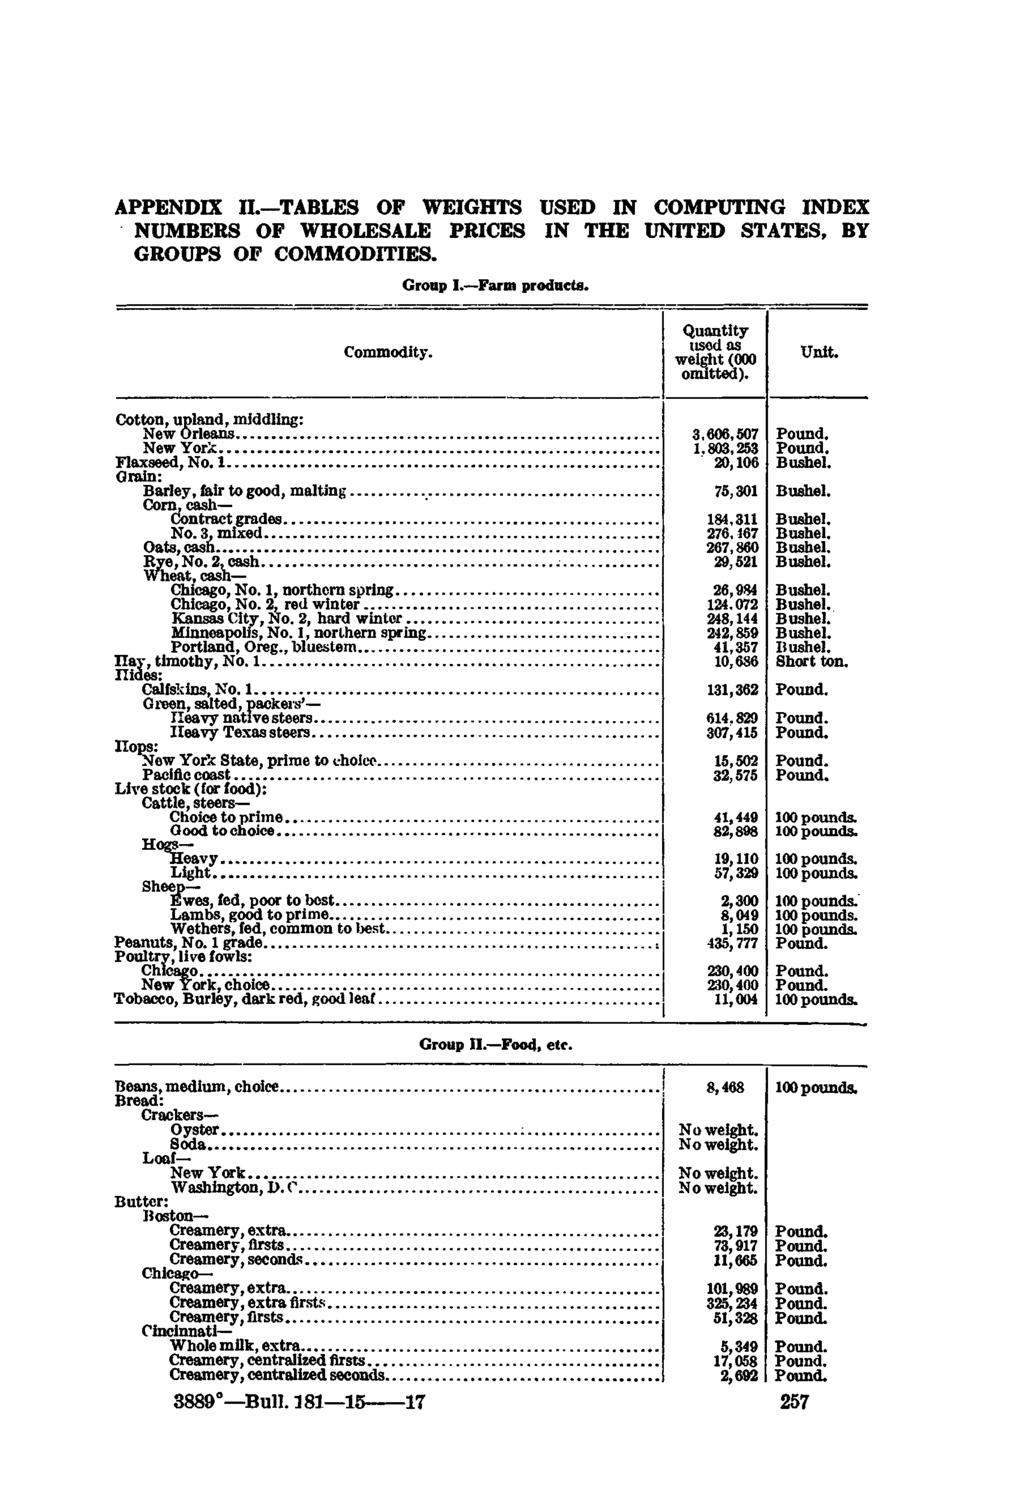 APPENDIX II. TABLES OP WEIGHTS USED IN COMPUTING INDEX NUMBERS OP WHOLESALE PRICES IN THE UNITED STATES, BY GROUPS OF COMMODITIES. Group I. Farm products. Commodity.